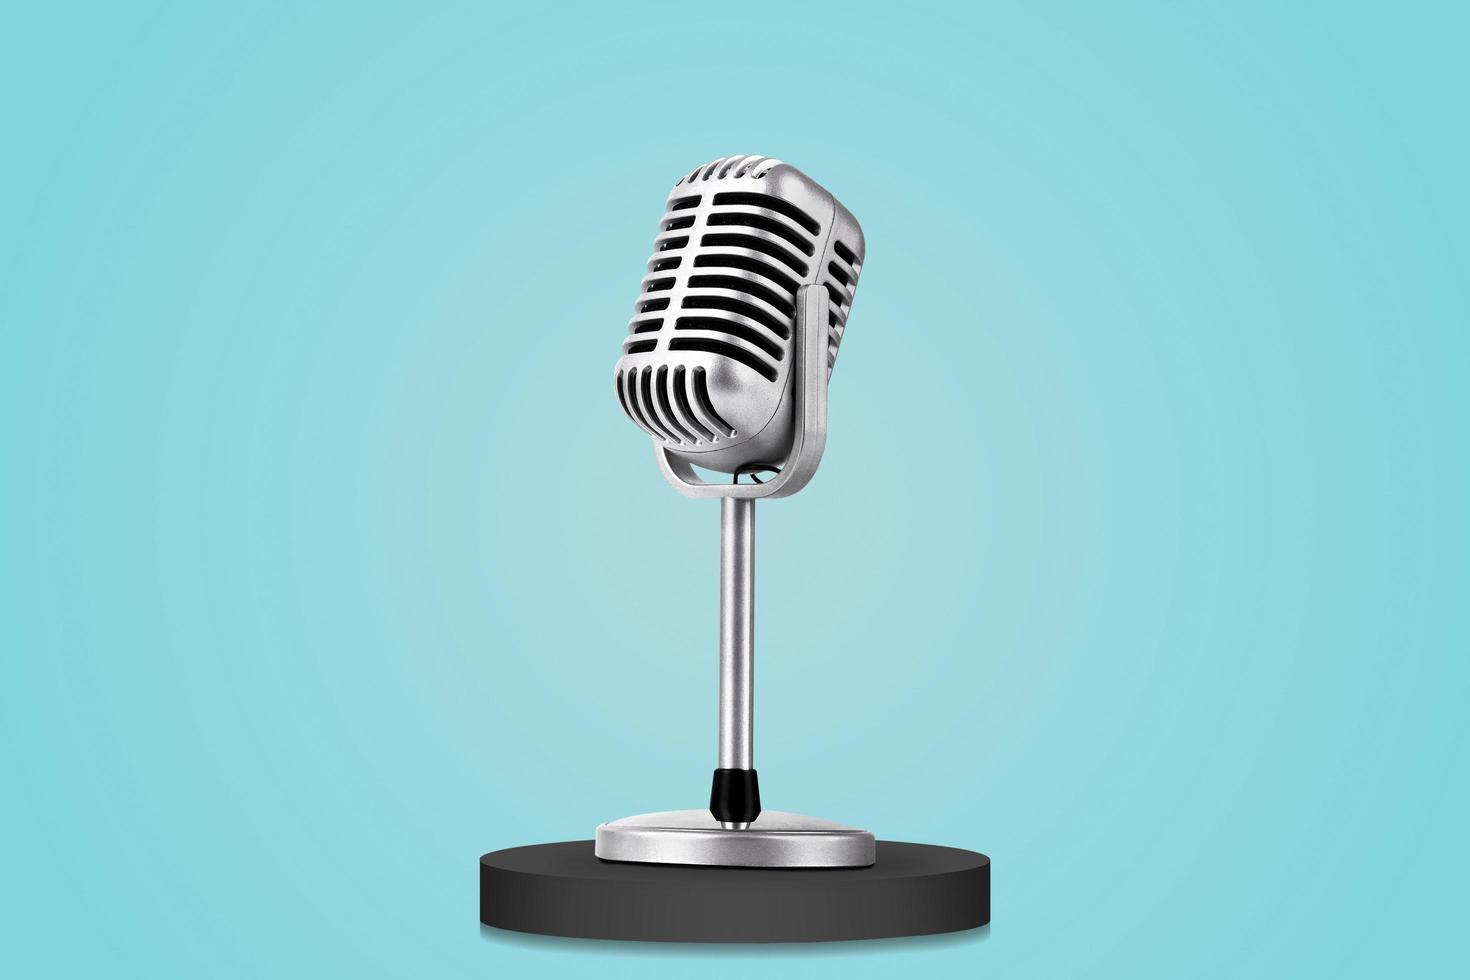 Retro style microphone isolated on blue background photo